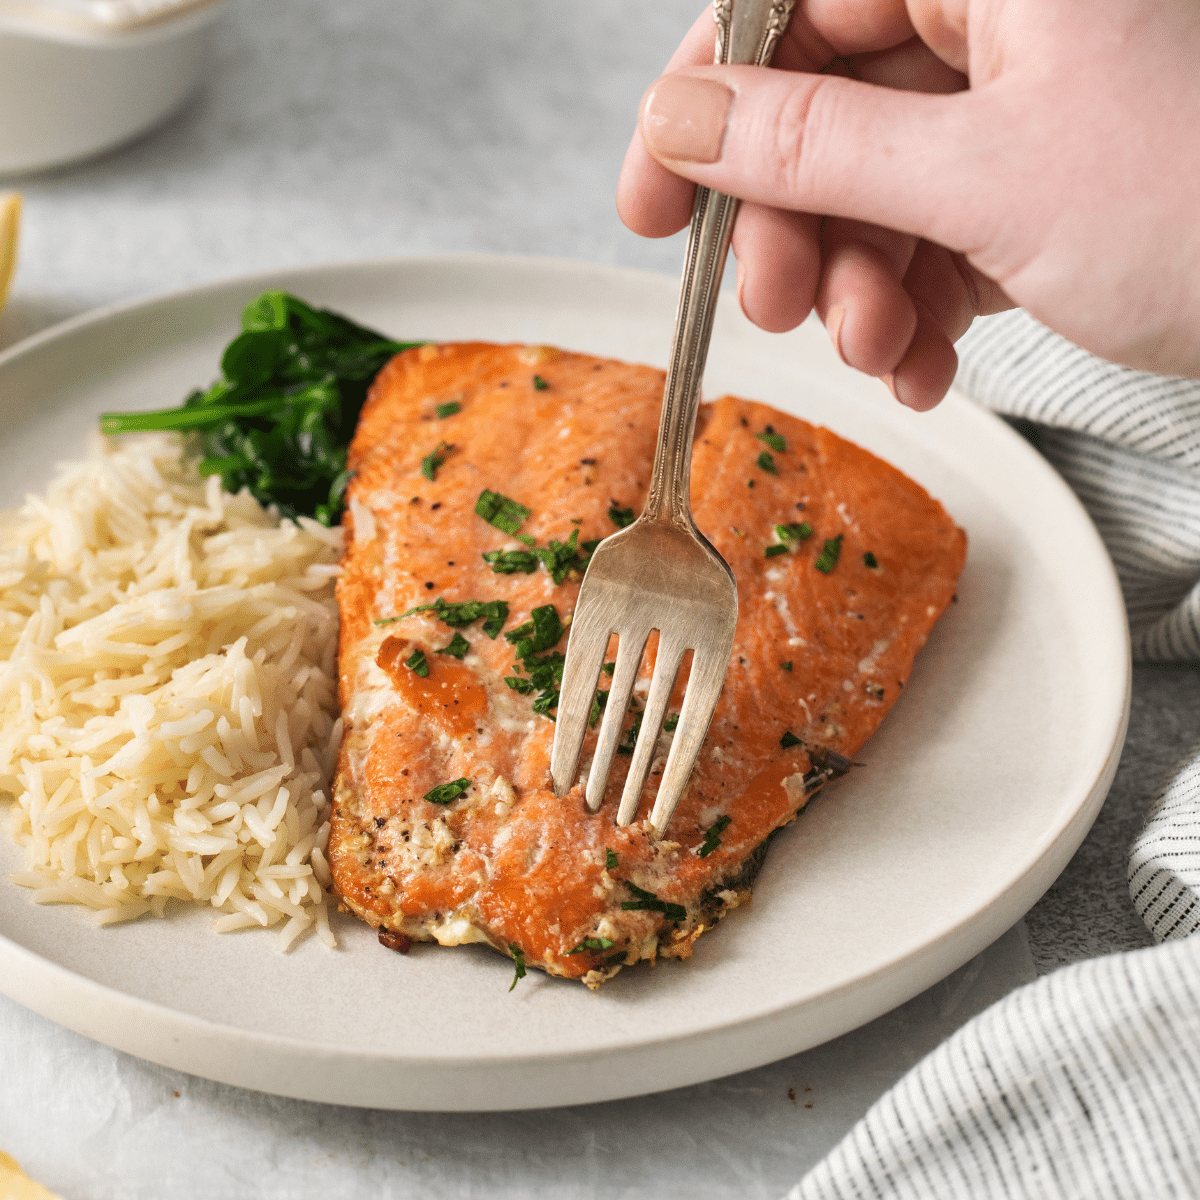 How to Cook Frozen Salmon Burgers (Oven, Air Fryer, Skillet) - Just Cook